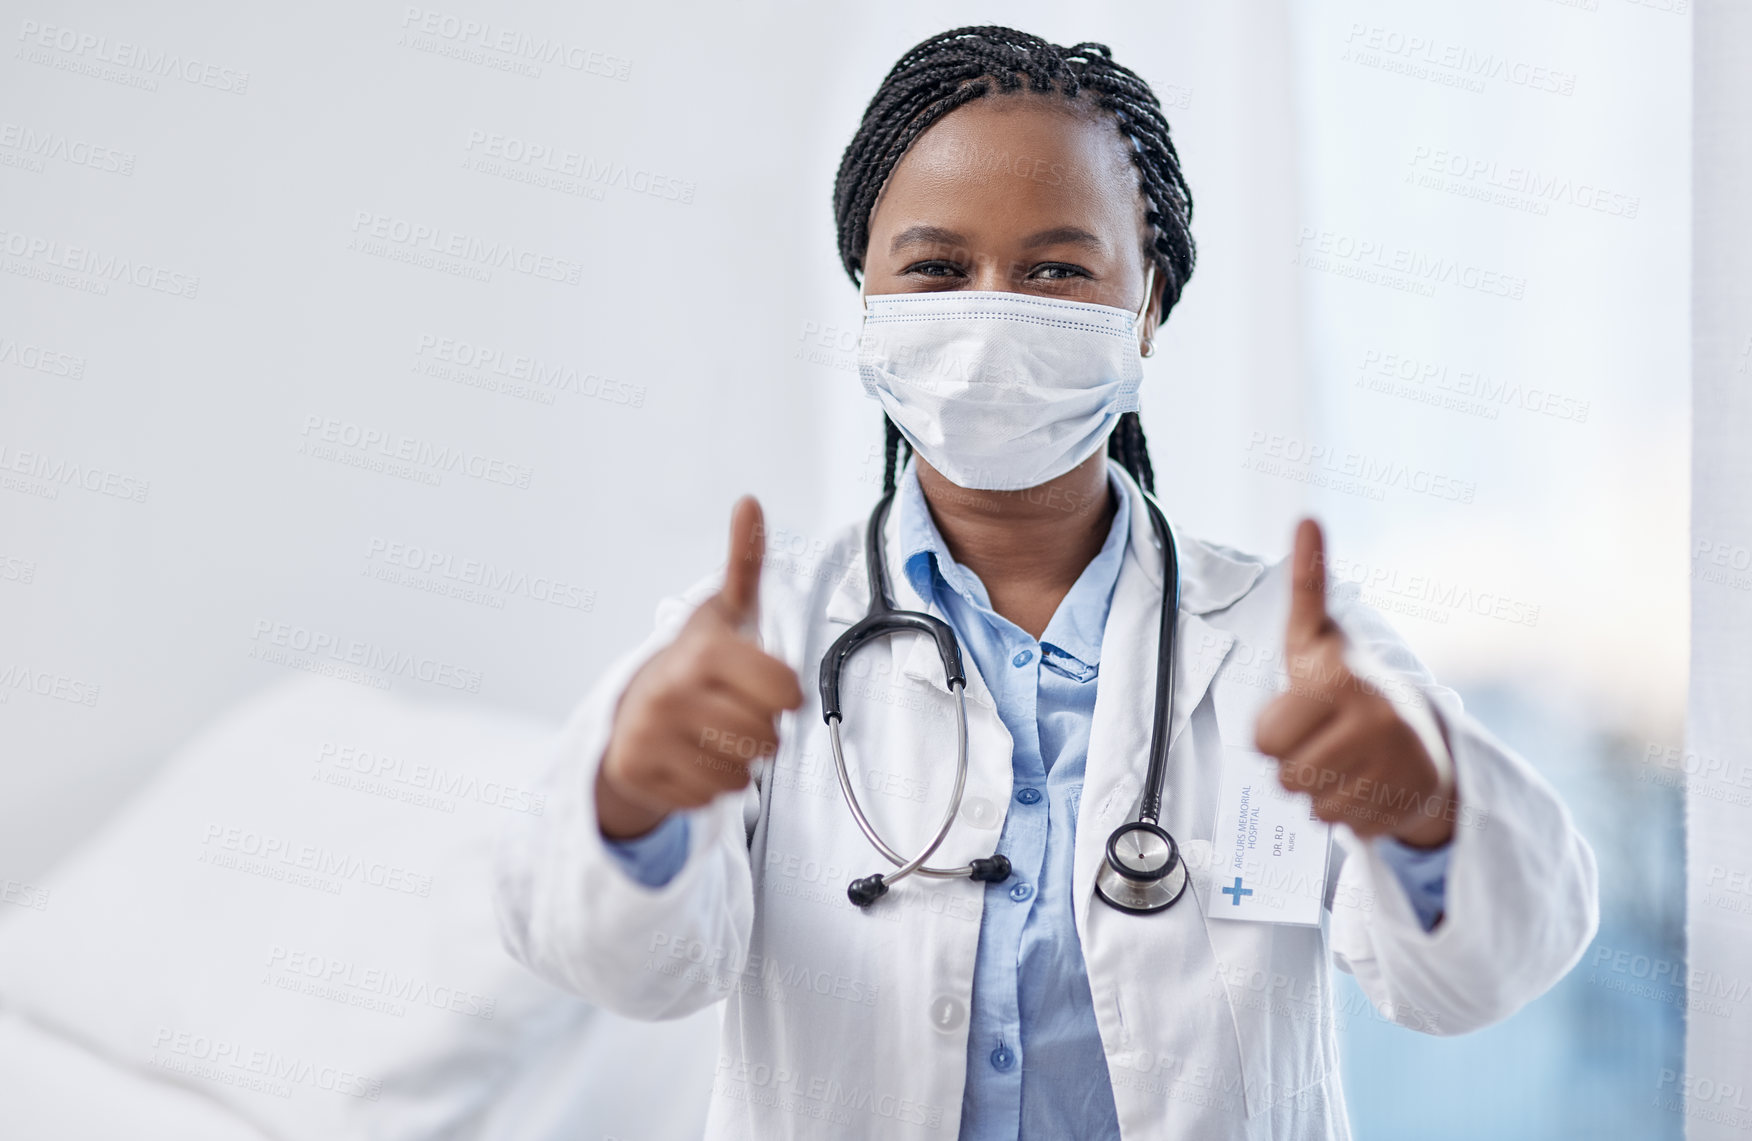 Buy stock photo Portrait of a young doctor wearing a face mask and showing thumbs up in a hospital